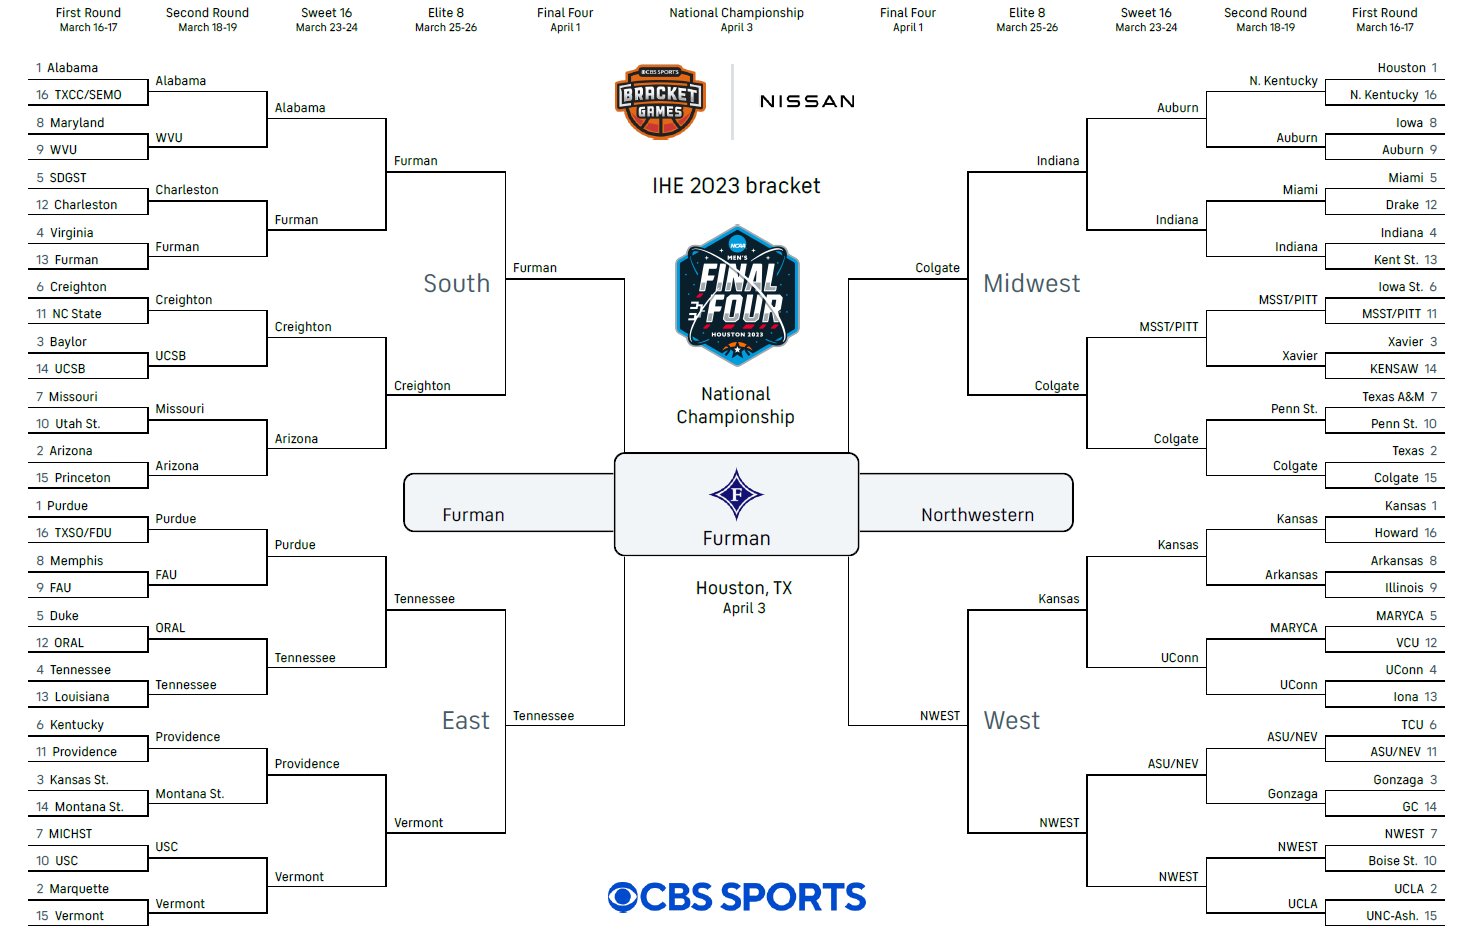 The 2023 men's NCAA tournament results, if academics ruled